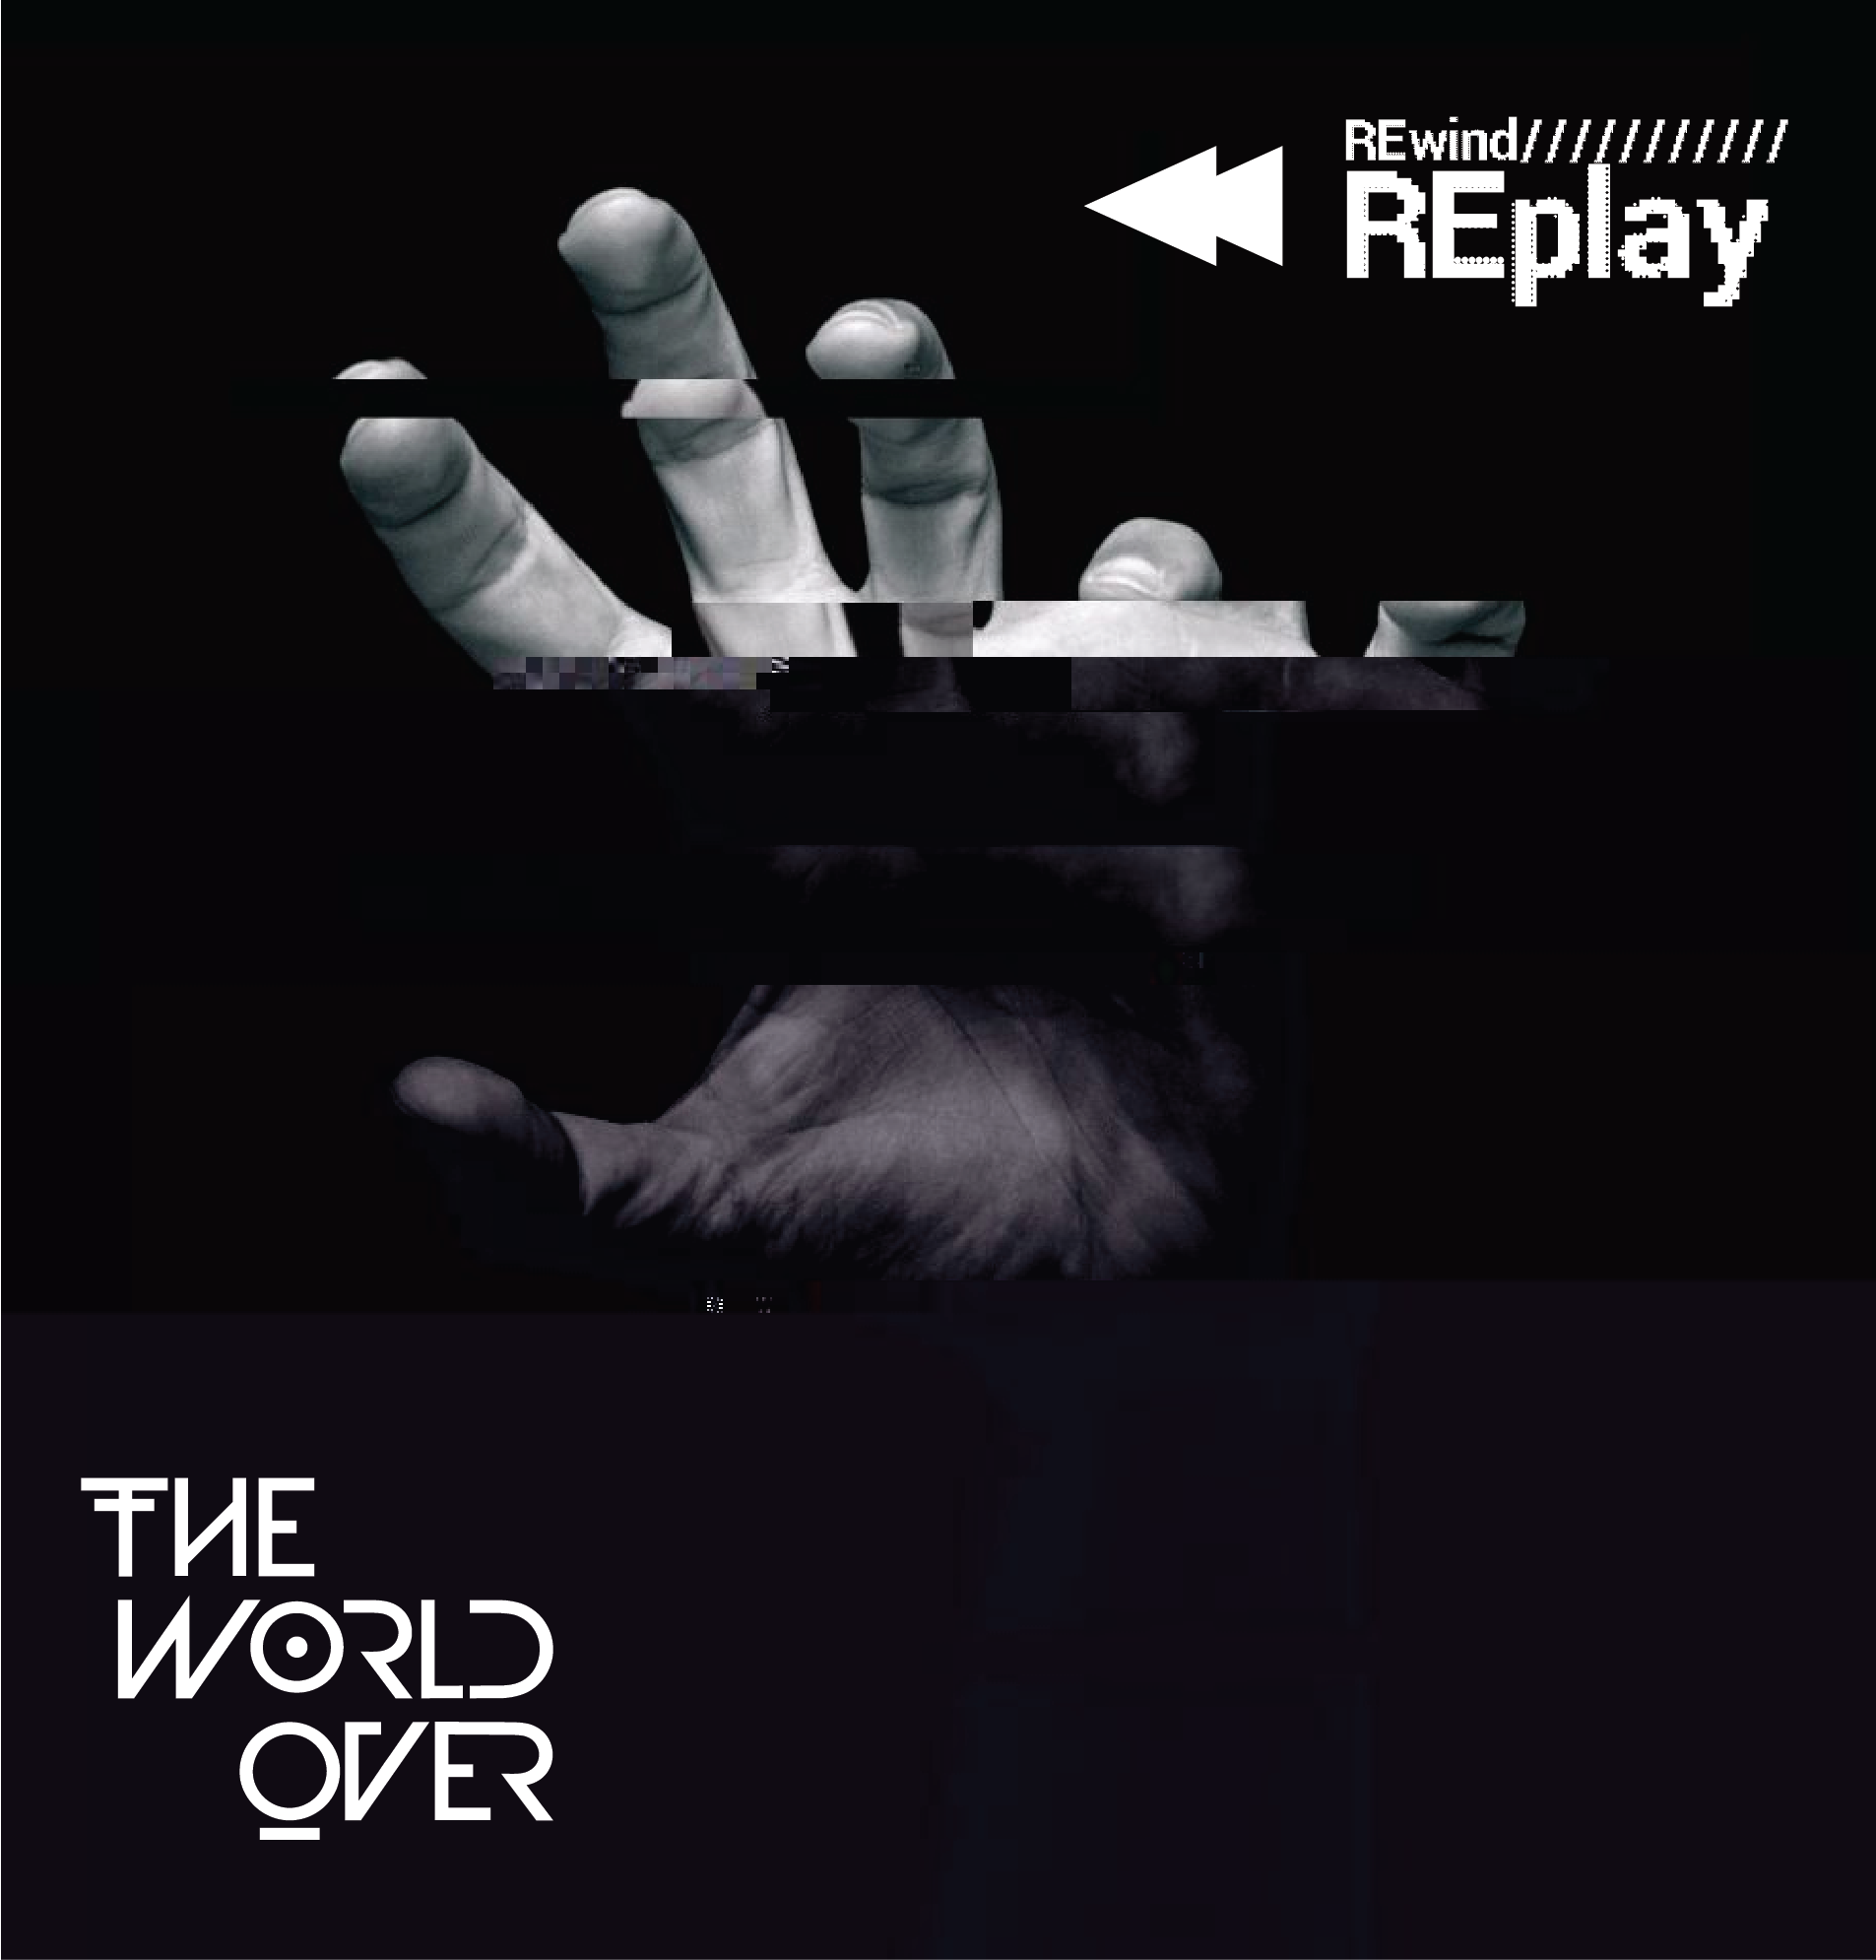 RewindReplayCover.png